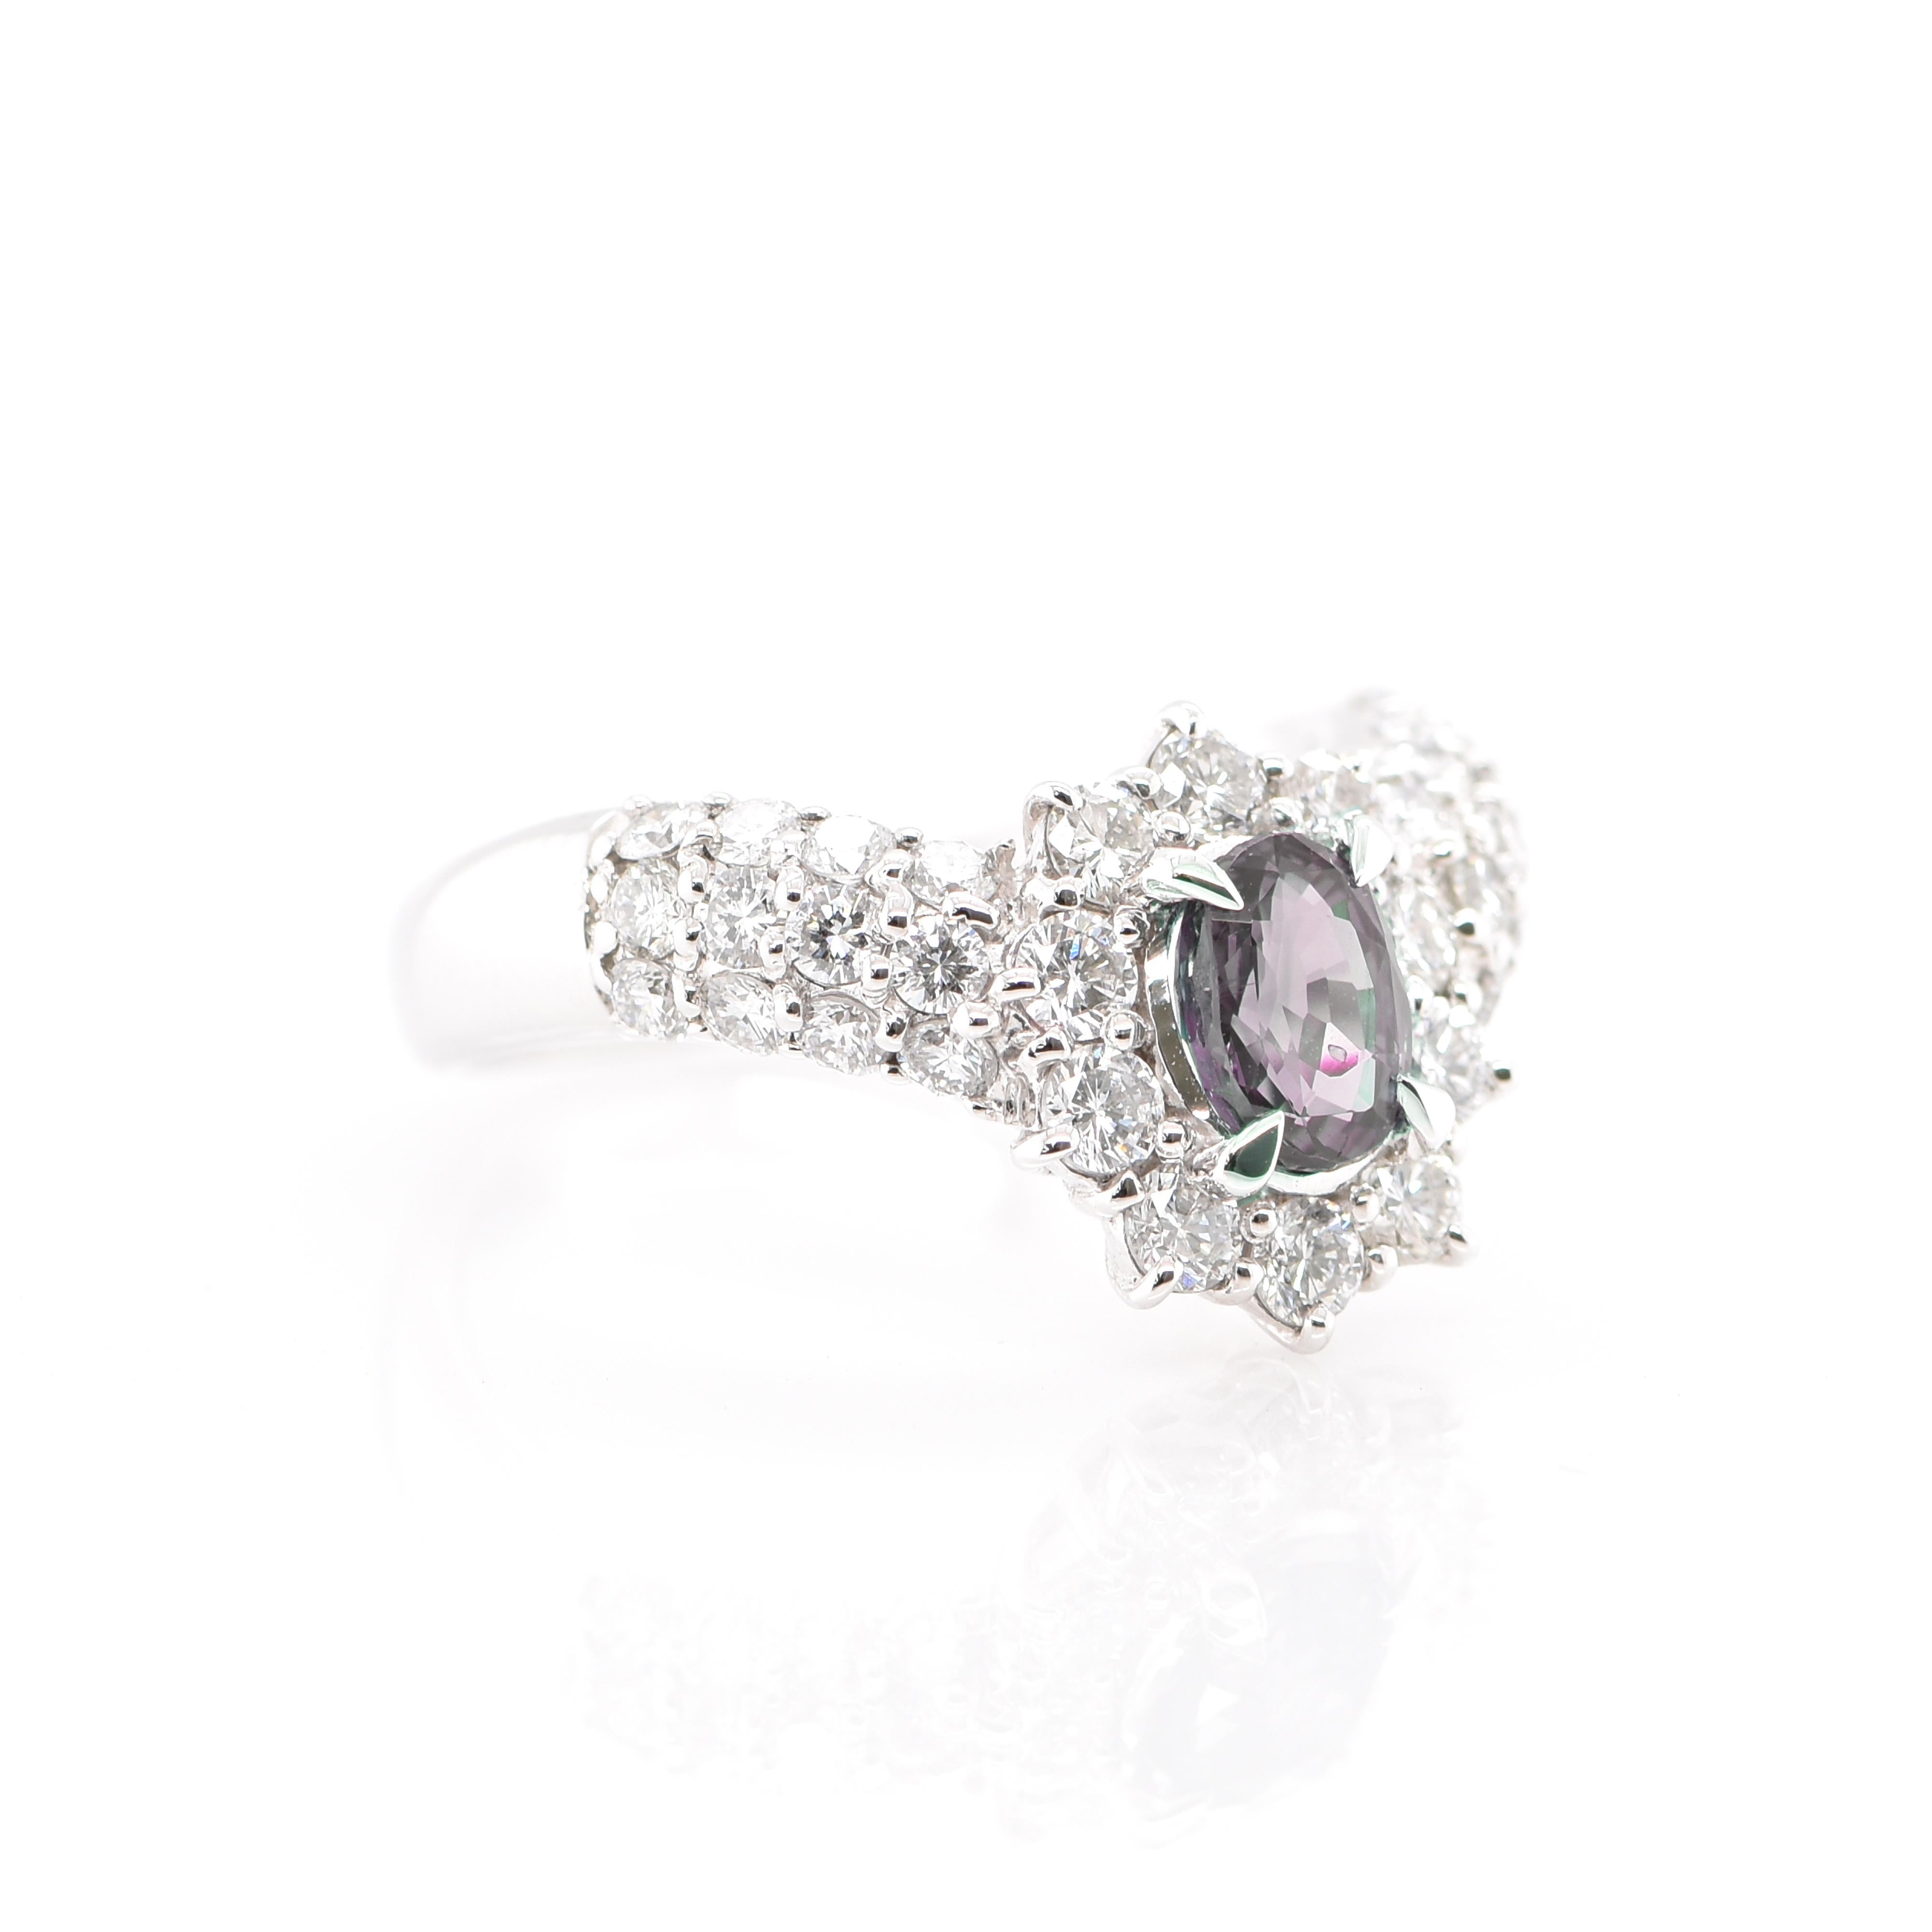 A gorgeous Cluster Ring featuring a 0.88 Carat Alexandrite and 1.14 Carats of Diamond Accents set in Platinum. Alexandrites produce a natural color-change phenomenon as they exhibit a Bluish Green Color under Fluorescent Light whereas a Purplish Red